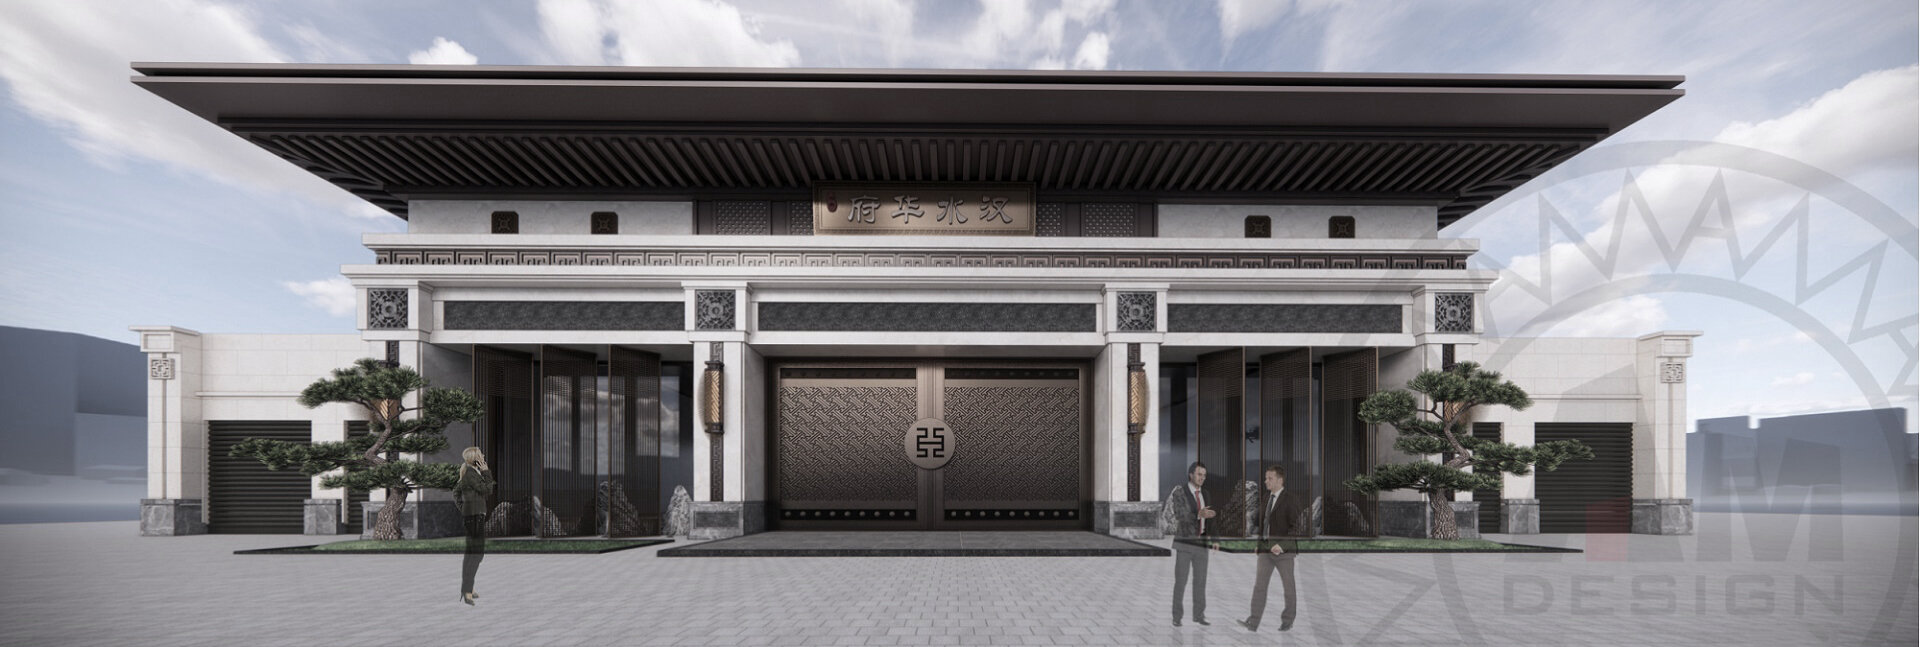 AM DESIGN | Architectural exterior design of the sales office in Hanshui Huafu, Shaanxi